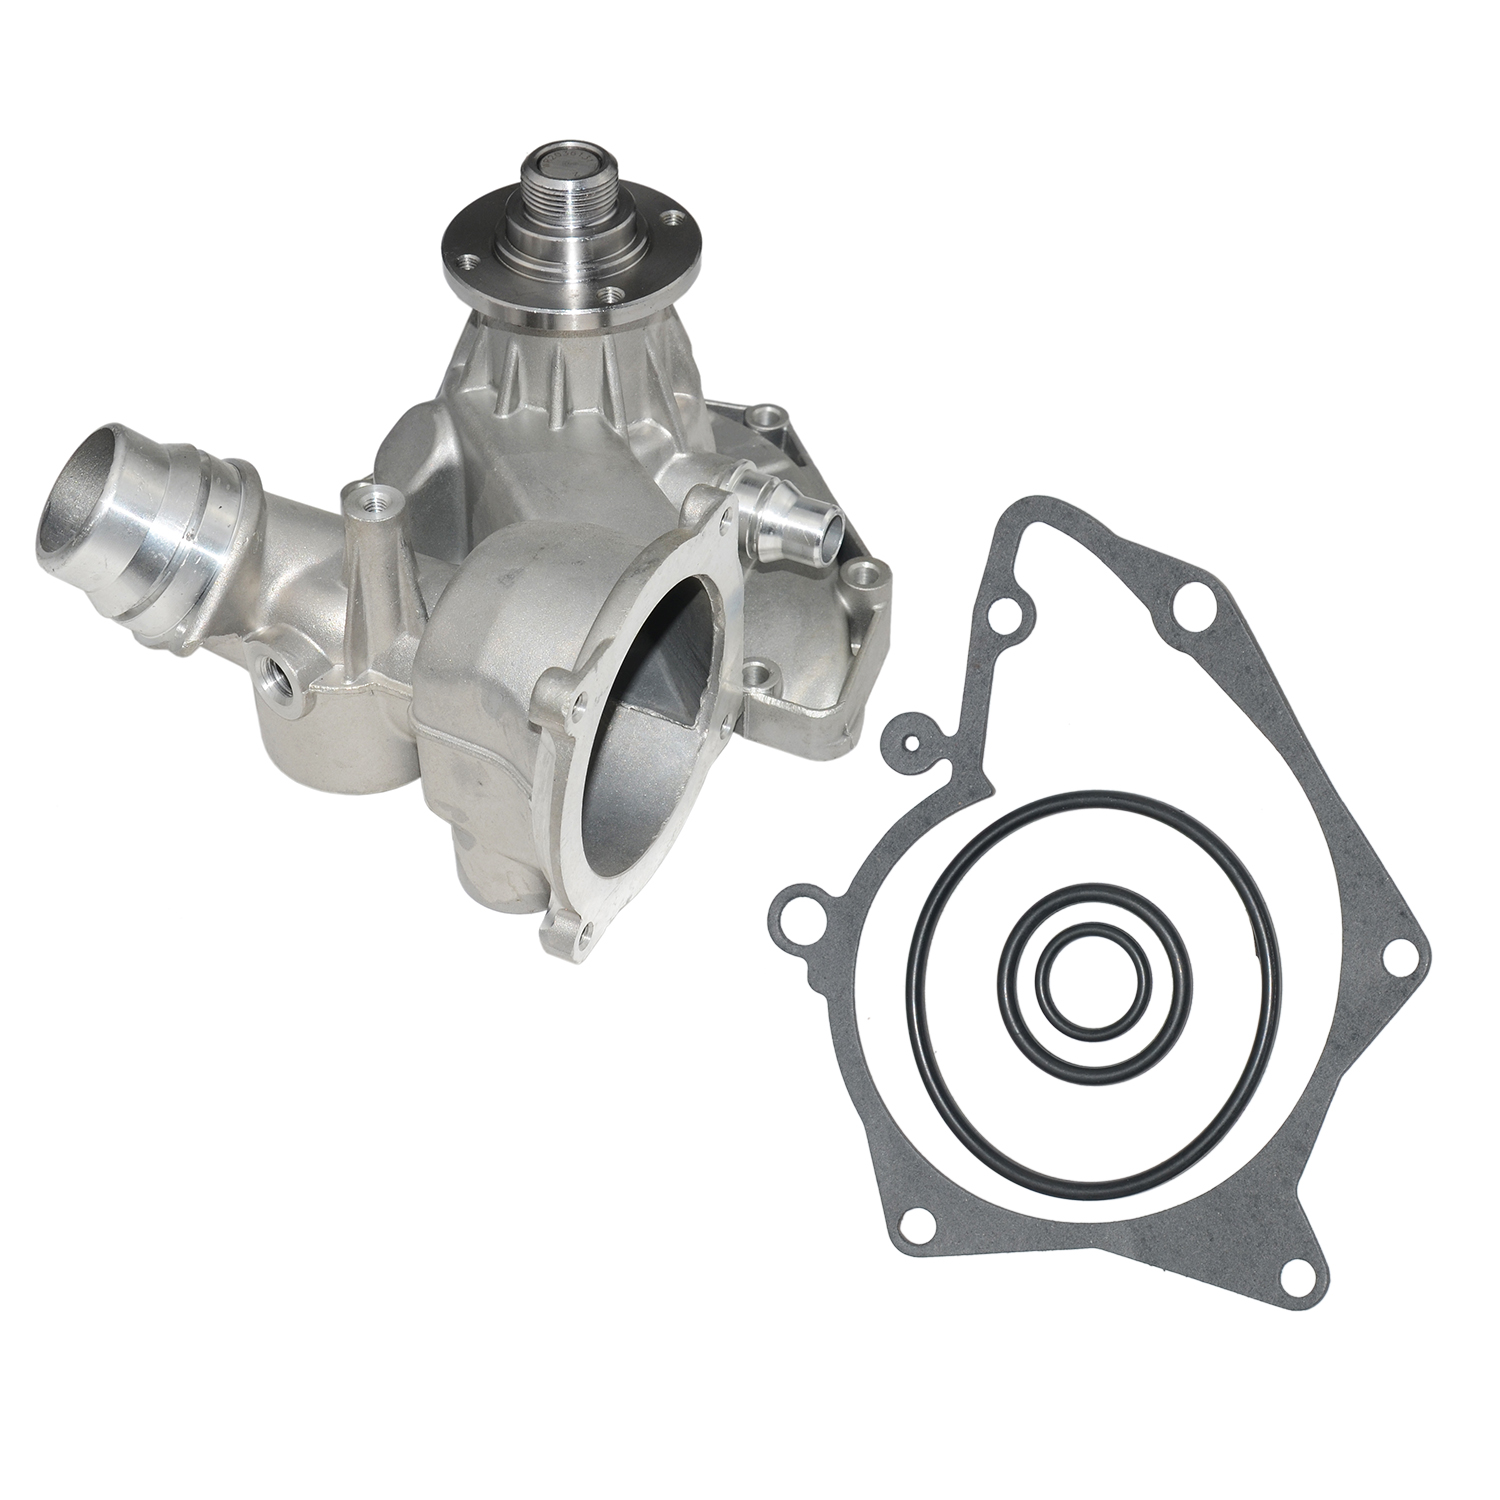 11510393336 For BMW X5 E53 E39 E63 E64 540i 545i 645Ci 4.4L Water Pump 11511713266 11511742598 8510324 PEB000030 - image 5 of 10